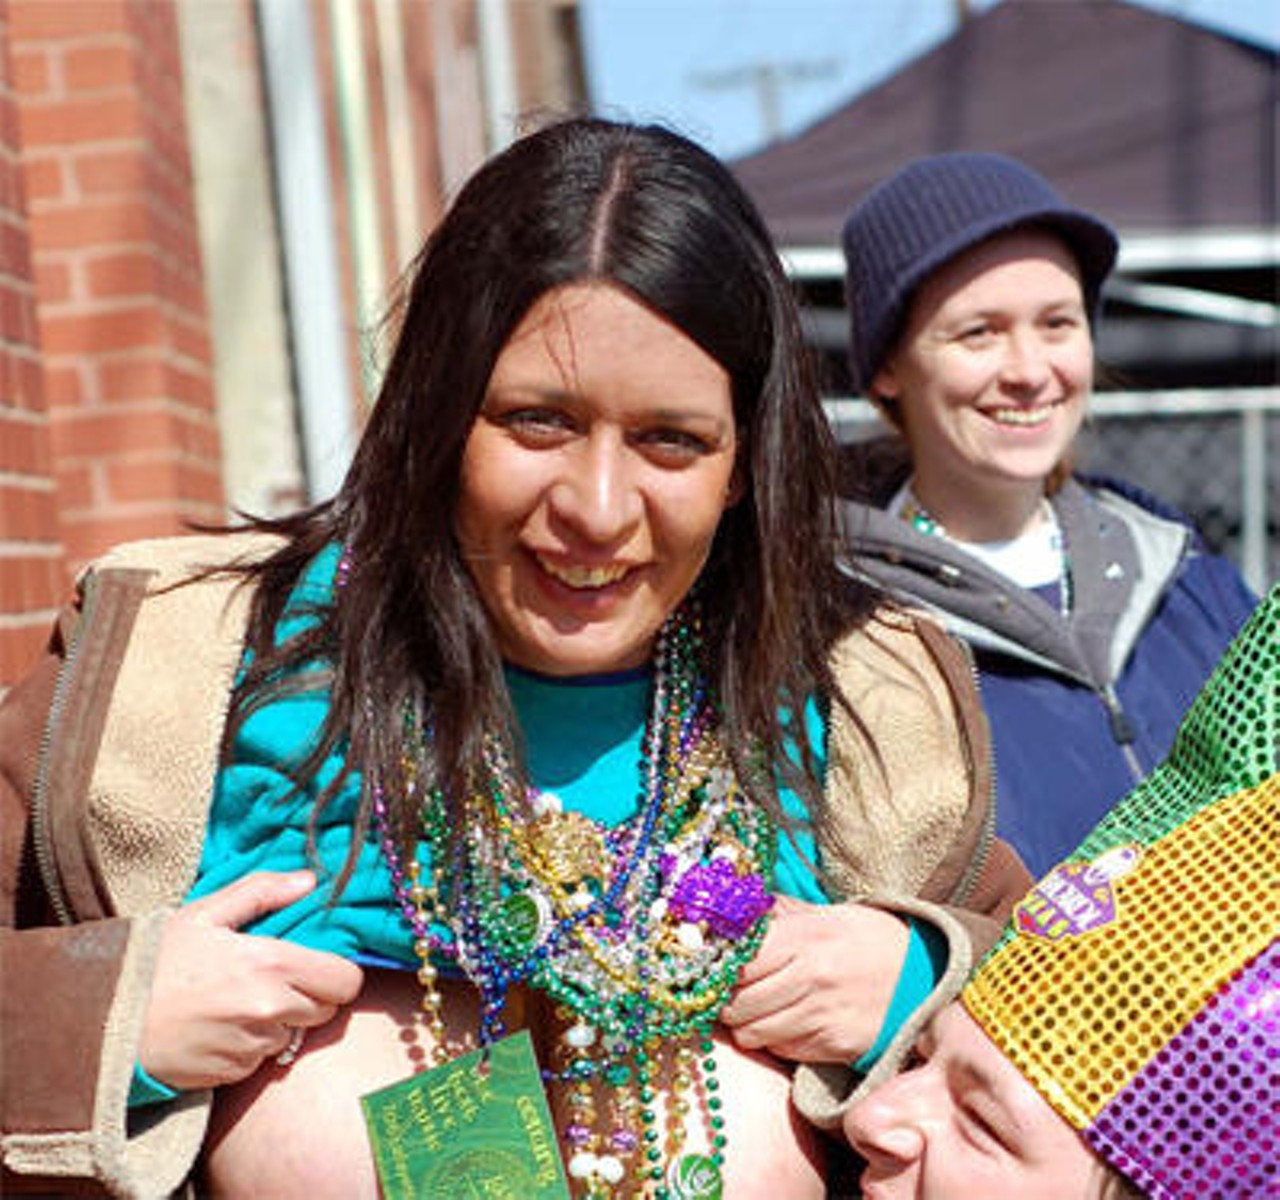 Lots of puke, lots of food, lots of beads and a few boobs. Mardi Gras may get accused of becoming too corporate, but St. Louisans still can take the gleam off it by getting wasted before noon. View more "Puke, Boobs, Beads" photos.